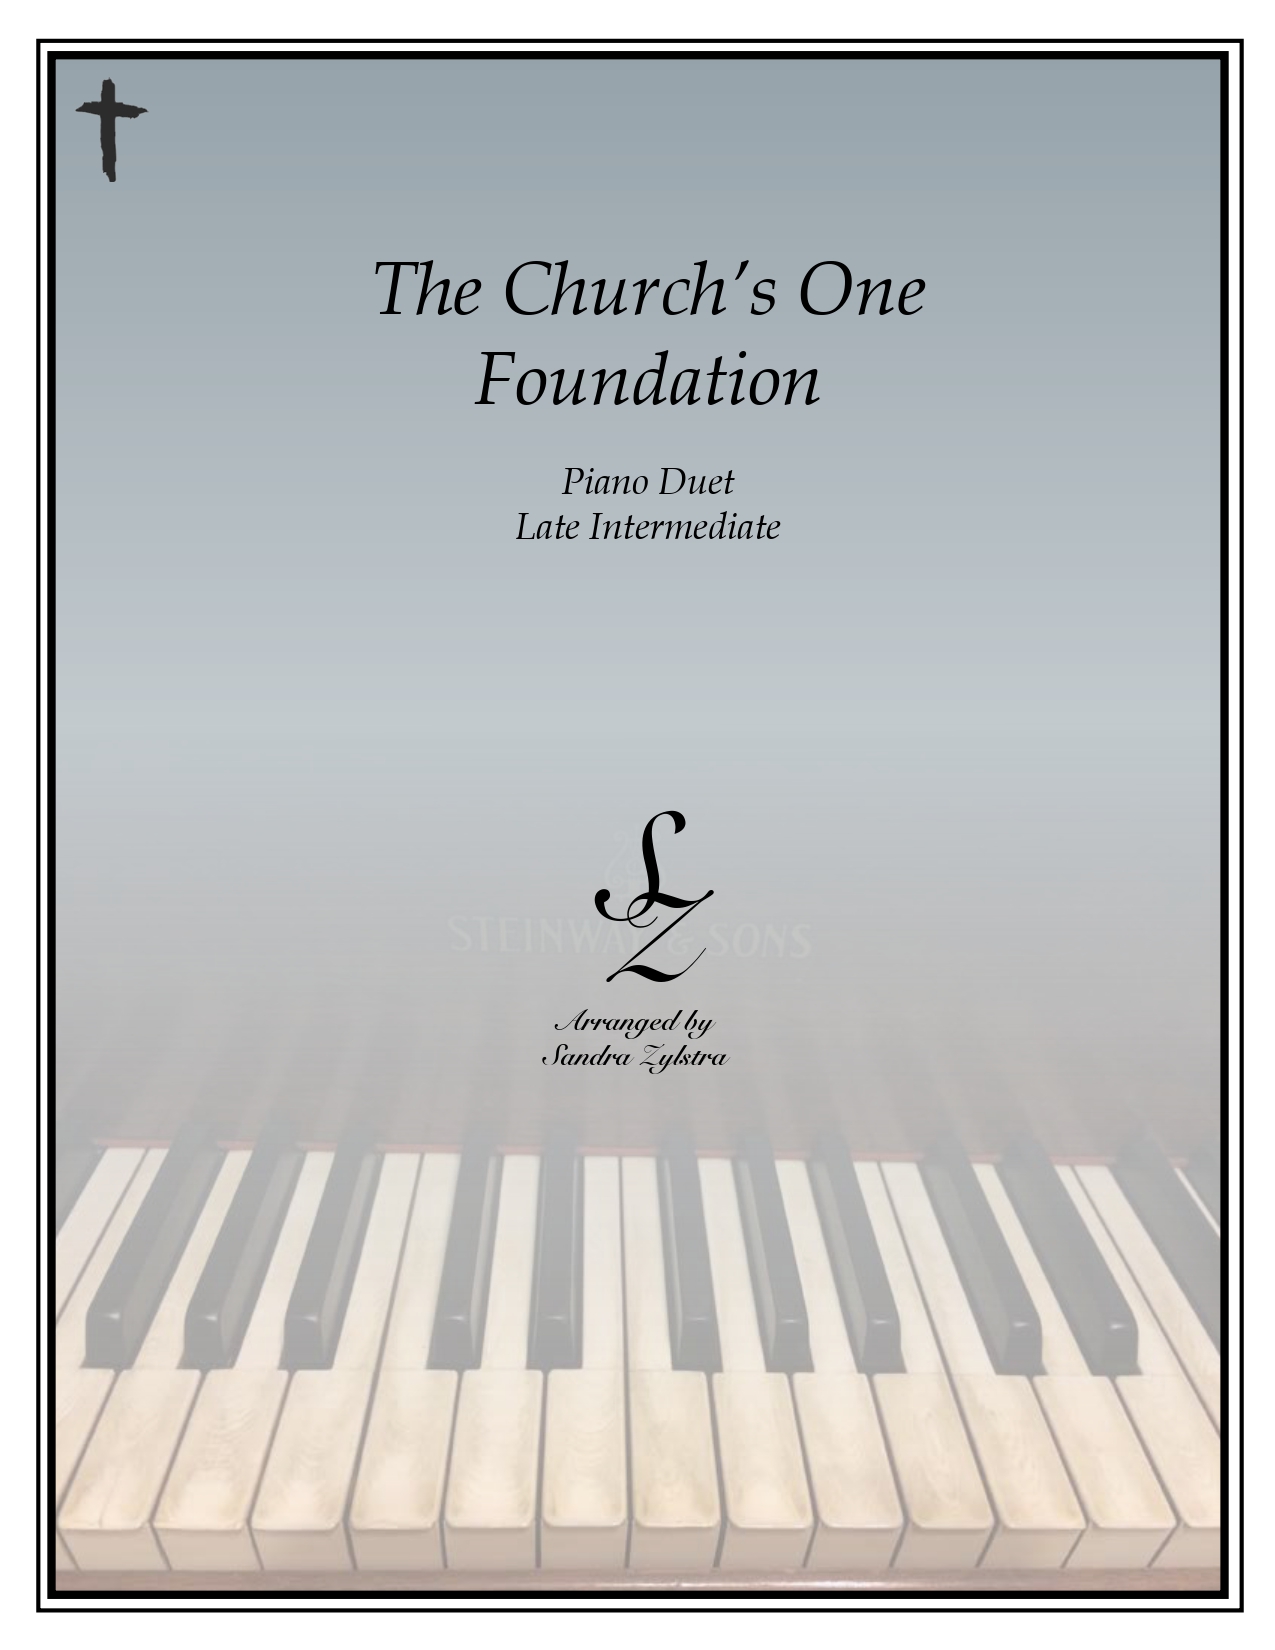 The Churchs One Foundation late intermediate duet cover page 00011